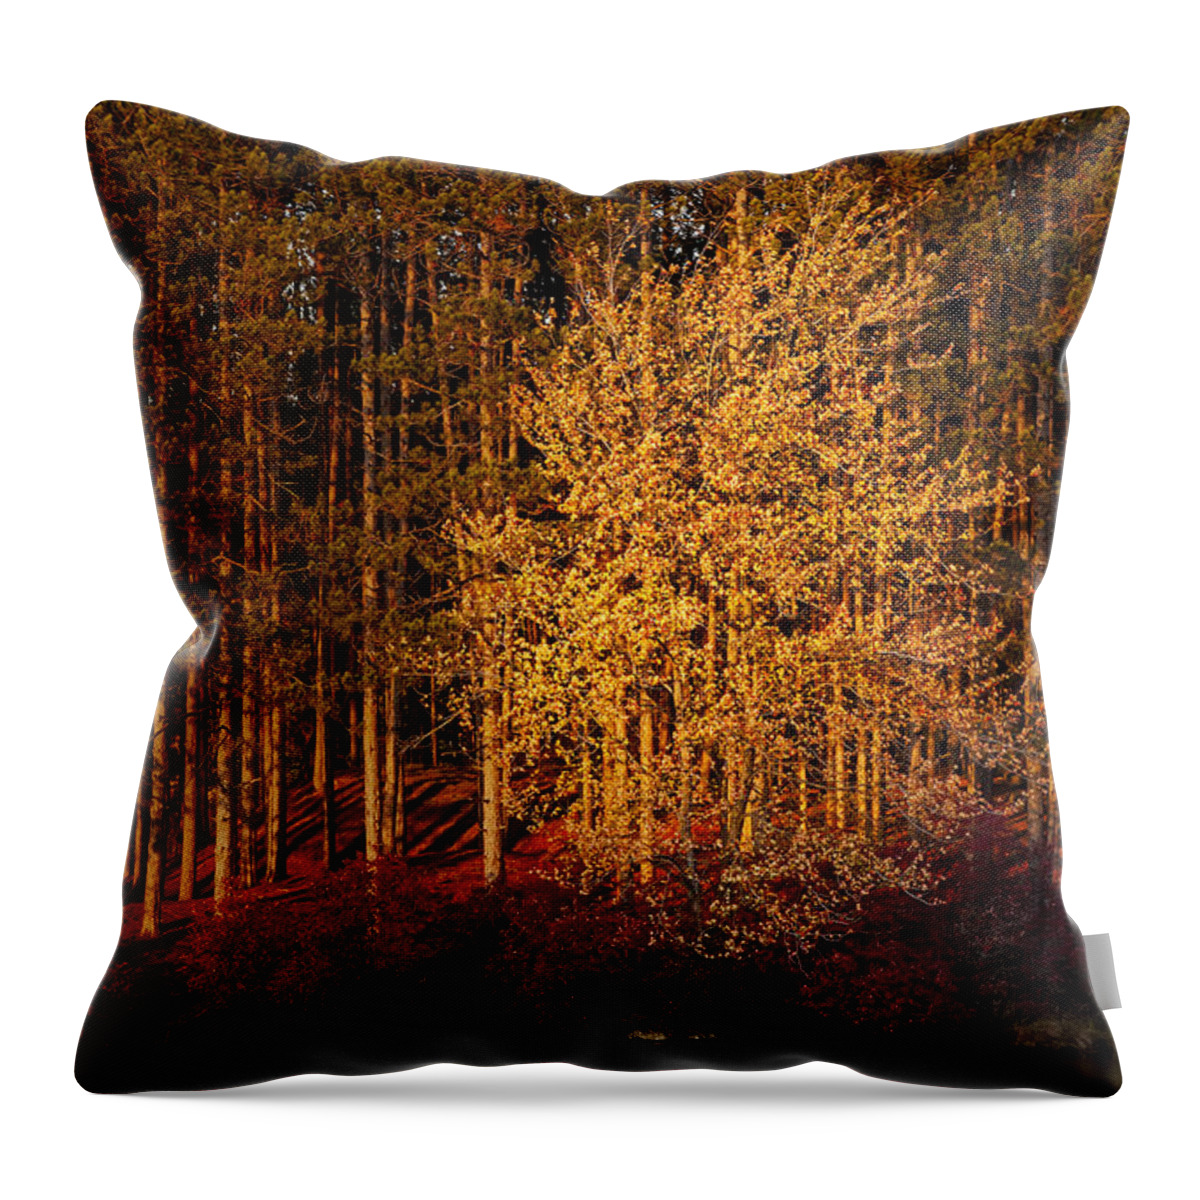 Autumn Throw Pillow featuring the photograph Summers End by Susan Candelario